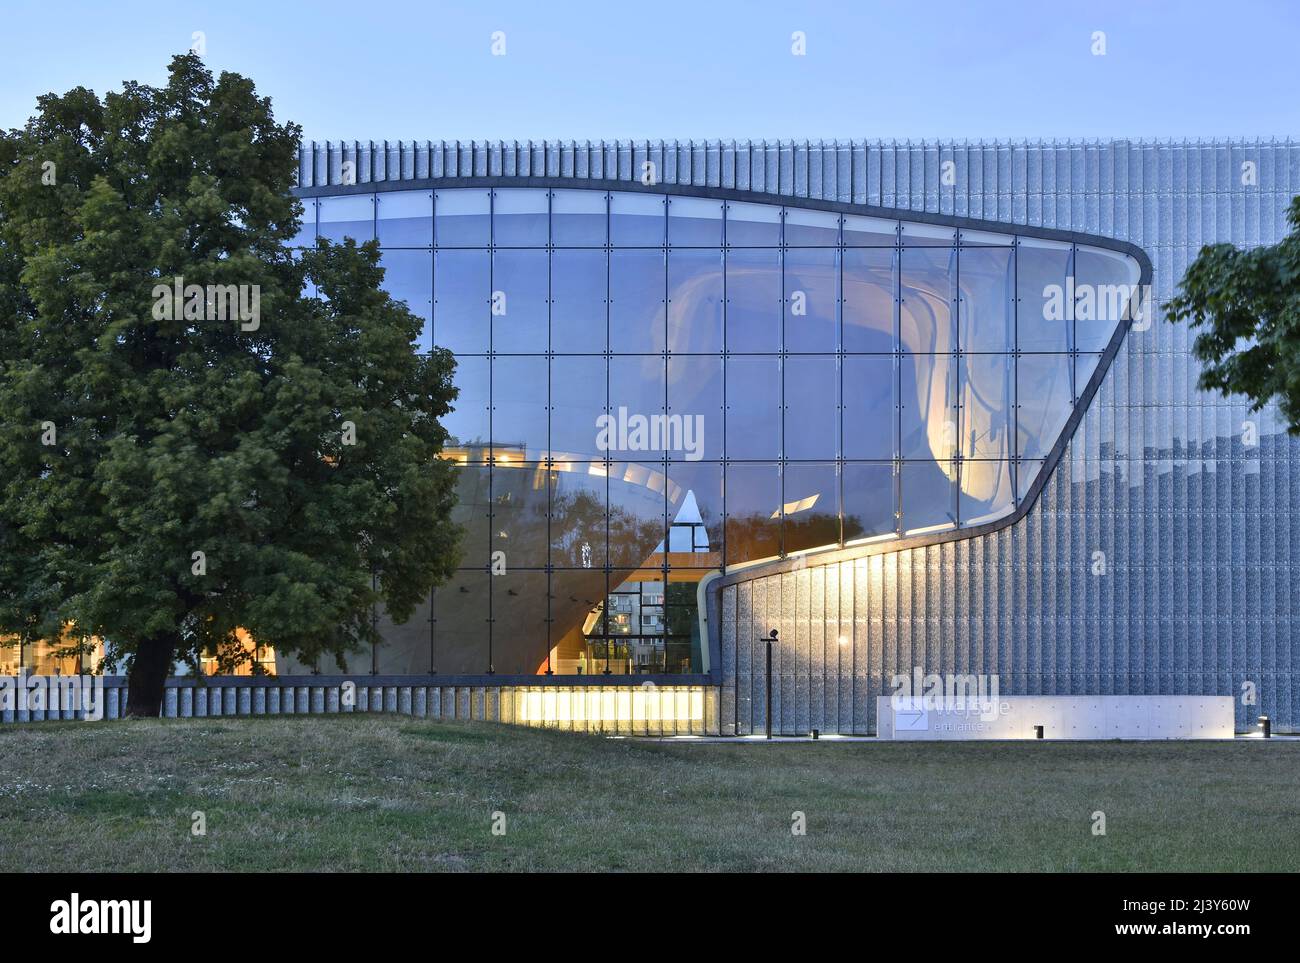 POLIN - Museum of the History of Polish Jews, modern building exterior in Warsaw Poland. Designed by Finnish architect Rainer Mahlamäki. Stock Photo